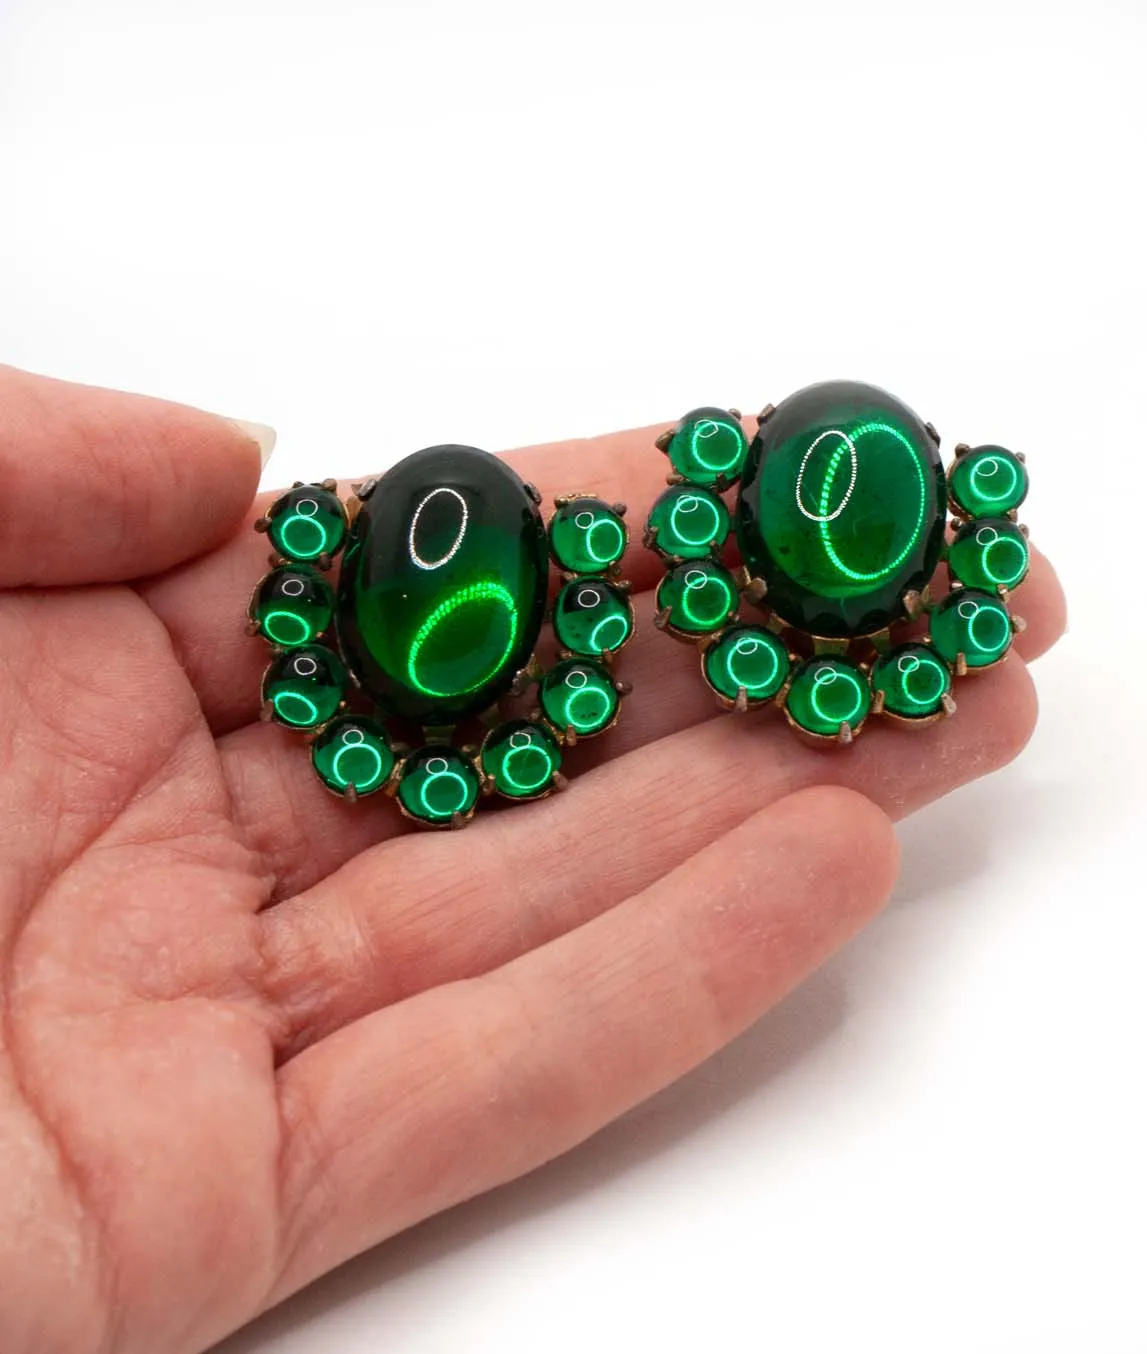 Pair of green glass cabochons dress clips held in a hand